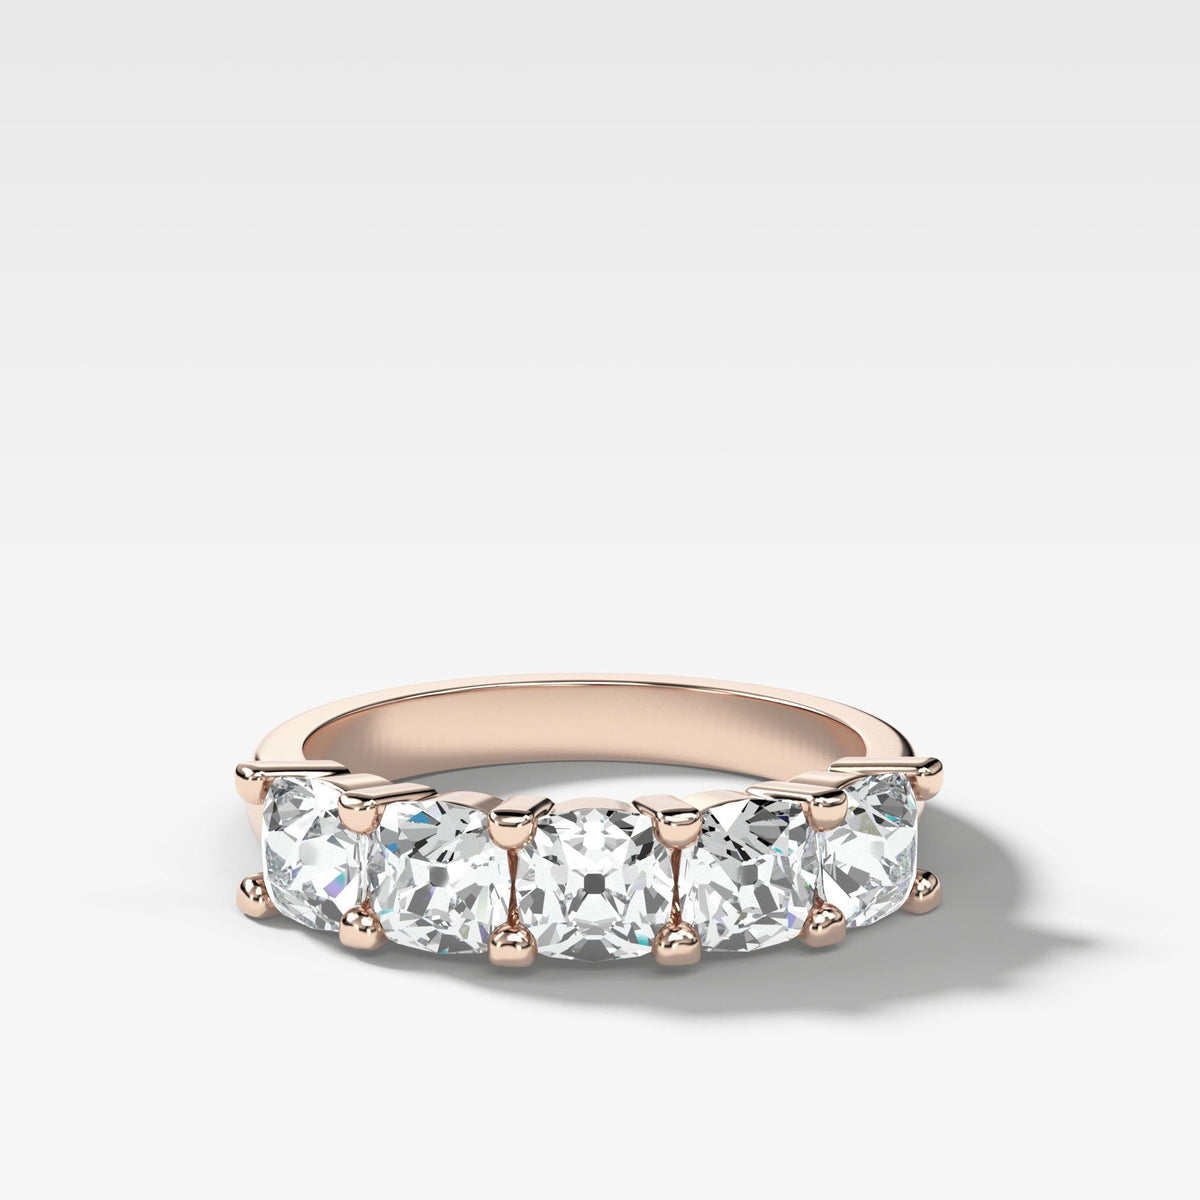 Five Stone Shared Prong Diamond Band With Old Mine Cuts (1.65ctw) by Good Stone in Rose Gold